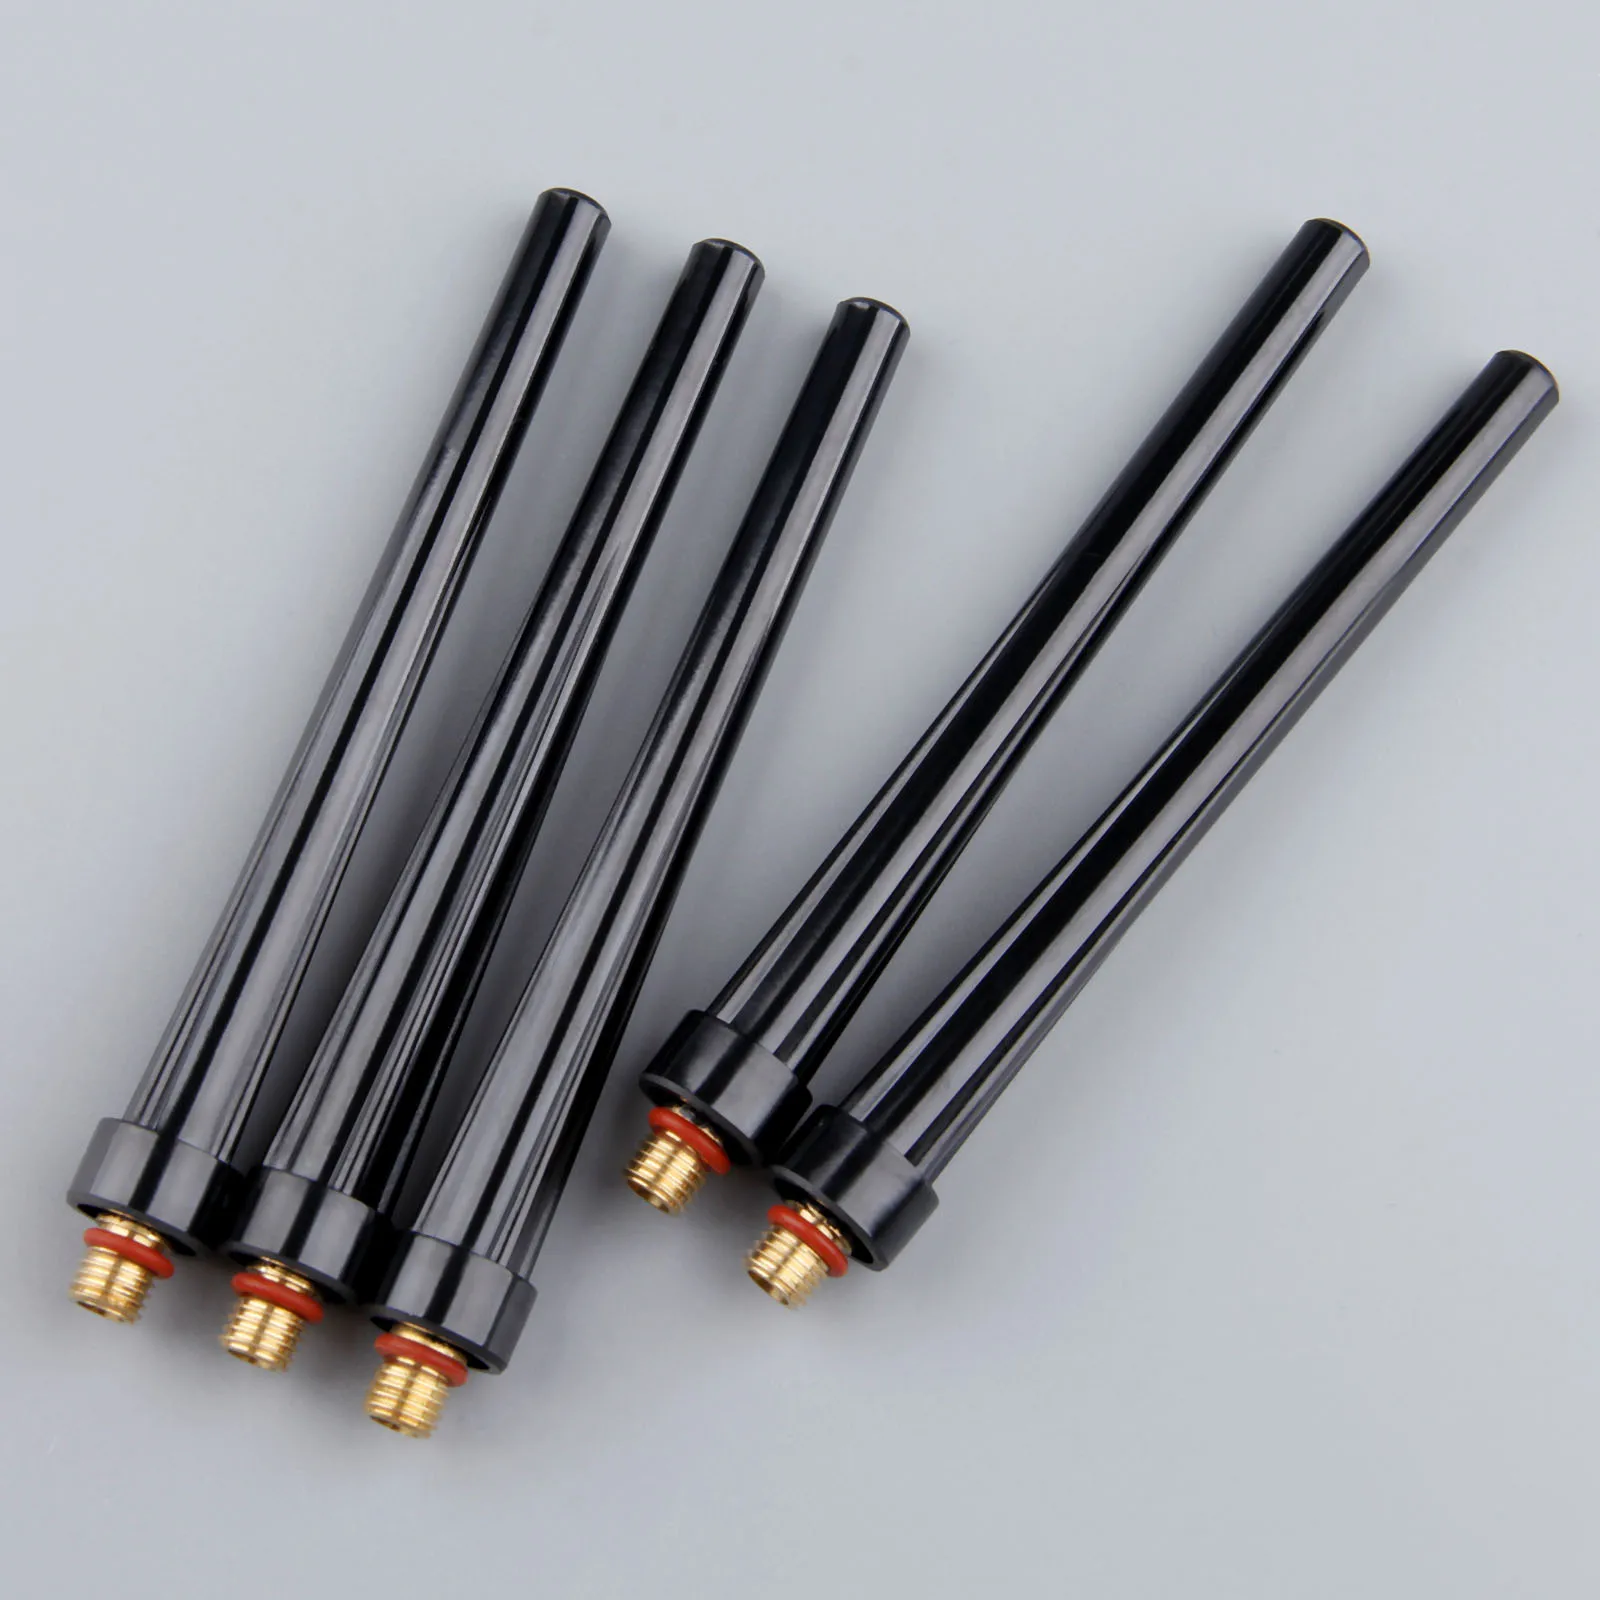 Long 41V24 TIG Welding Back Caps Long Fit for WP-9 WP-20 WP-25 TIG Welding Torches Cutting Consumable Parts 5pk